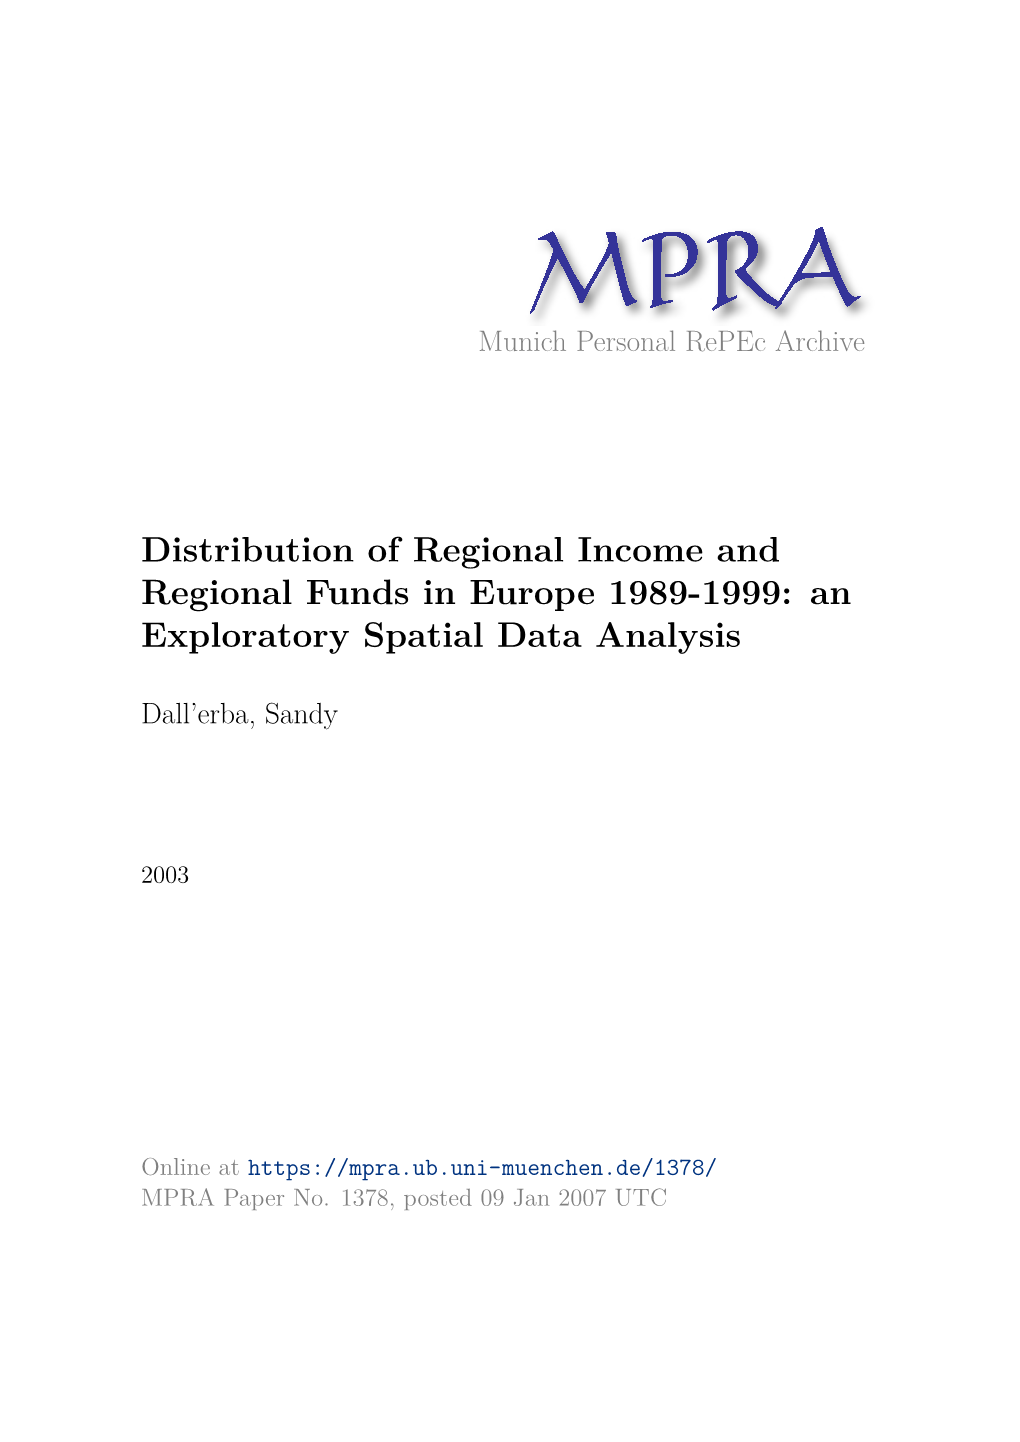 Distribution of Regional Income and Regional Funds in Europe 1989-1999: an Exploratory Spatial Data Analysis